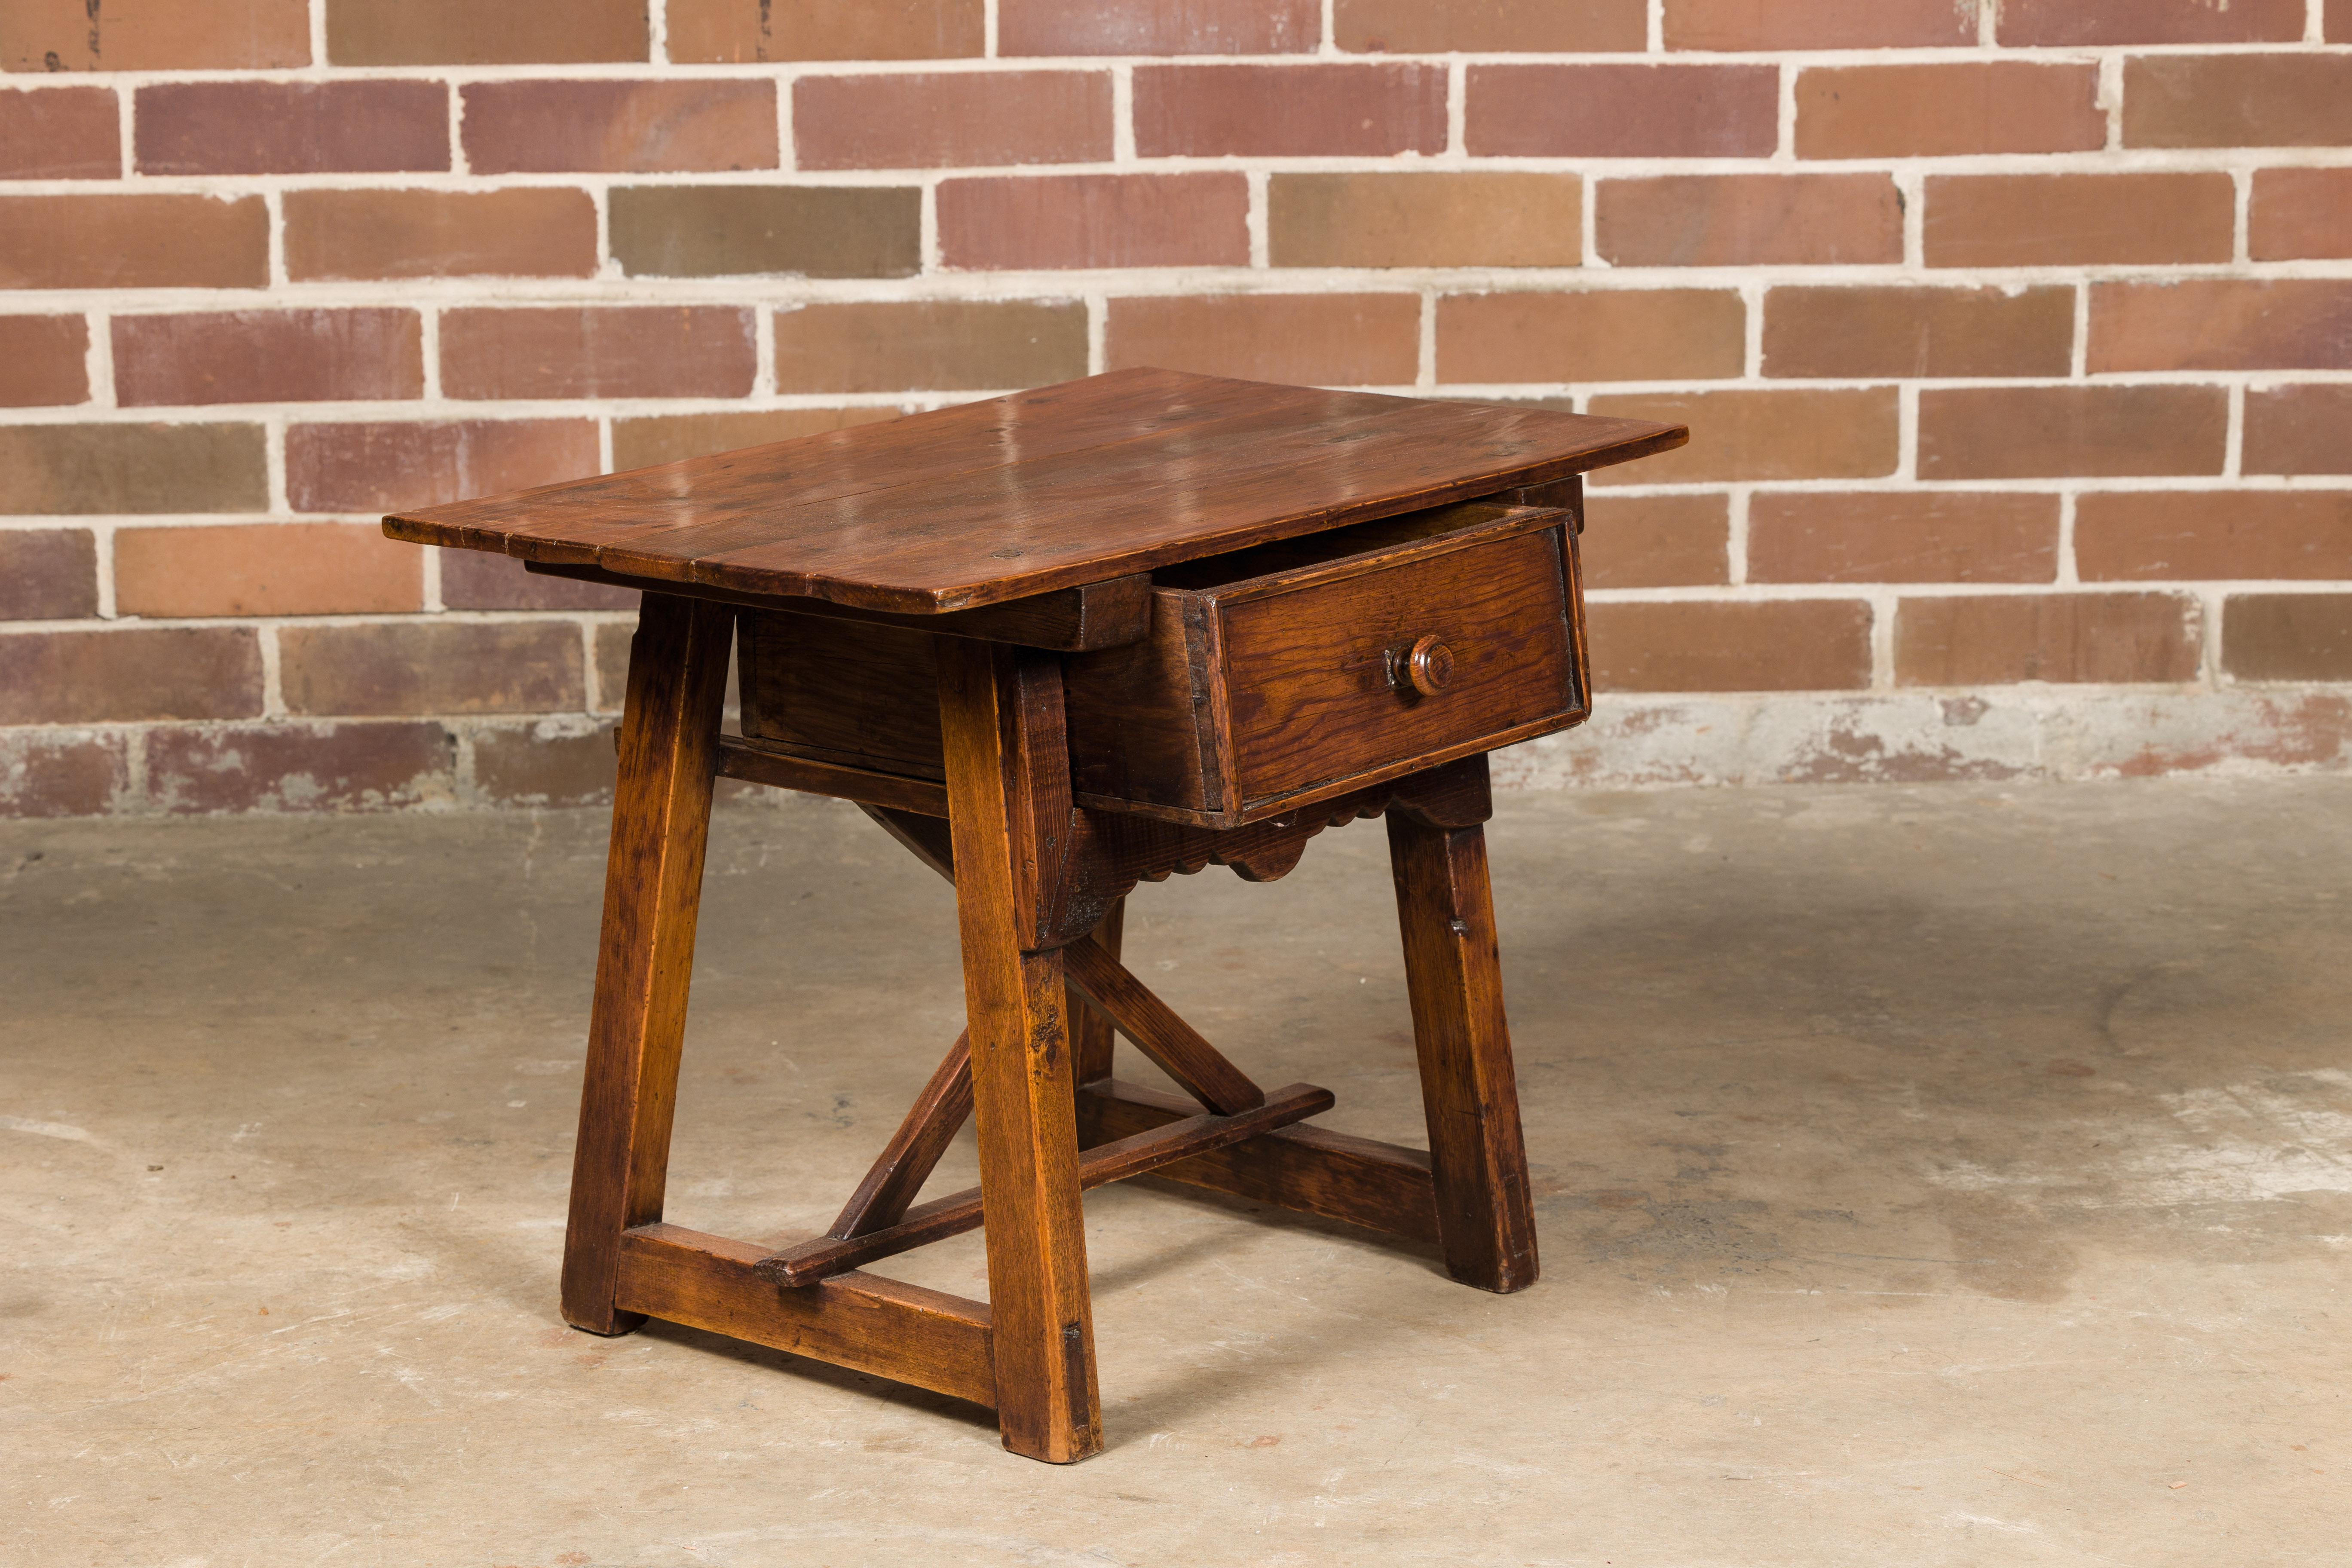 An English oak low side table from the 19th century with single drawer, carved apron and A-Frame base. This 19th-century English oak low side table exudes rustic charm and timeless elegance. Crafted from oak, it showcases a beautiful patina that